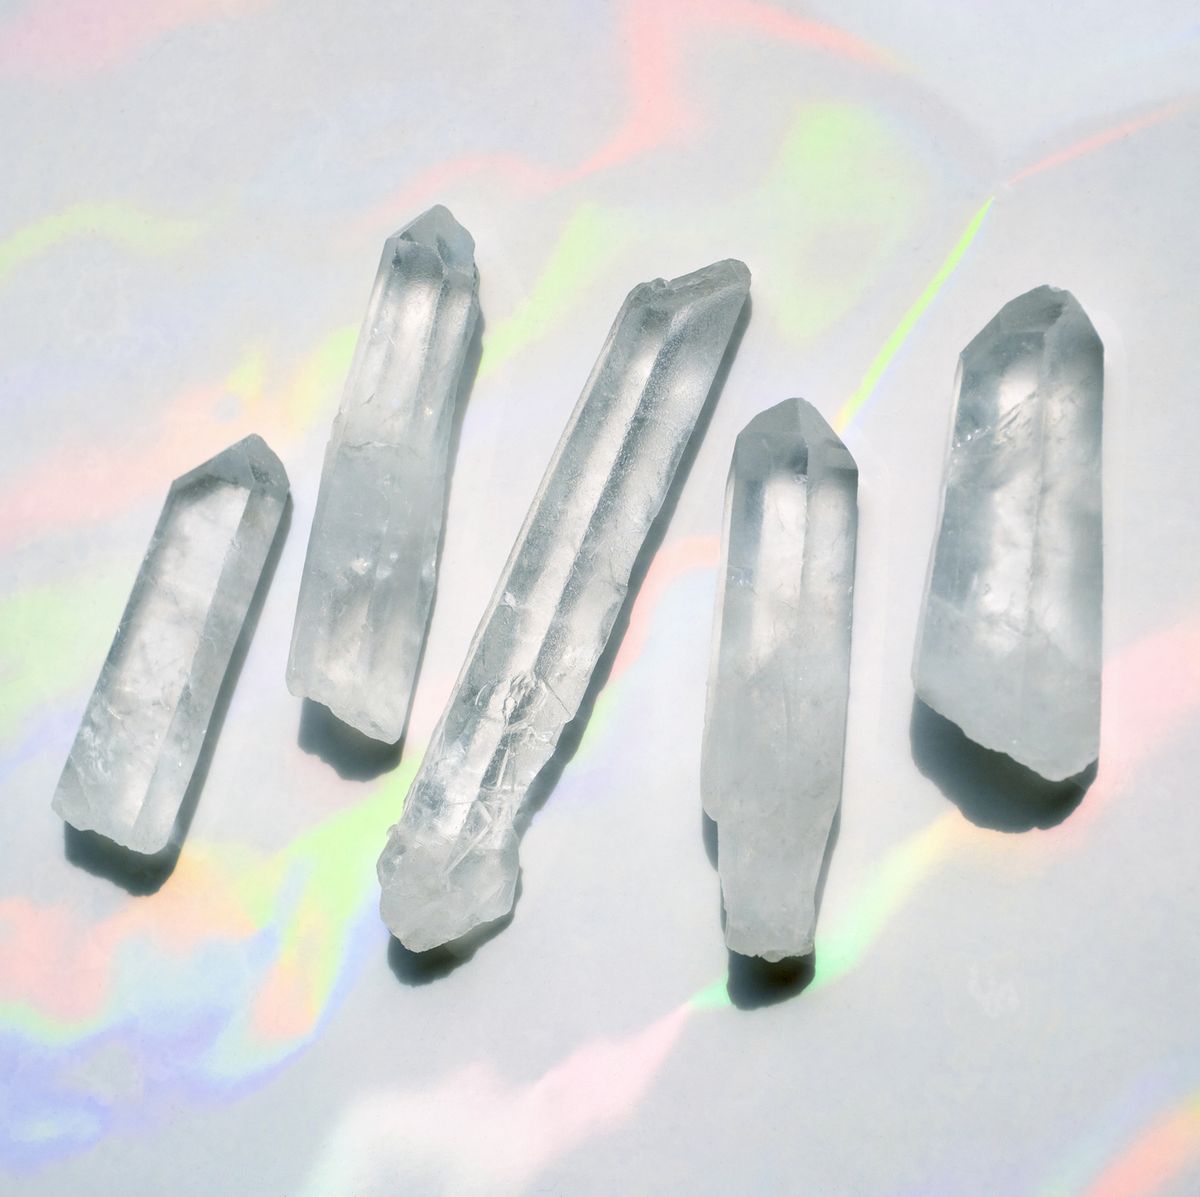 Where to Buy Crystals Online in 2022